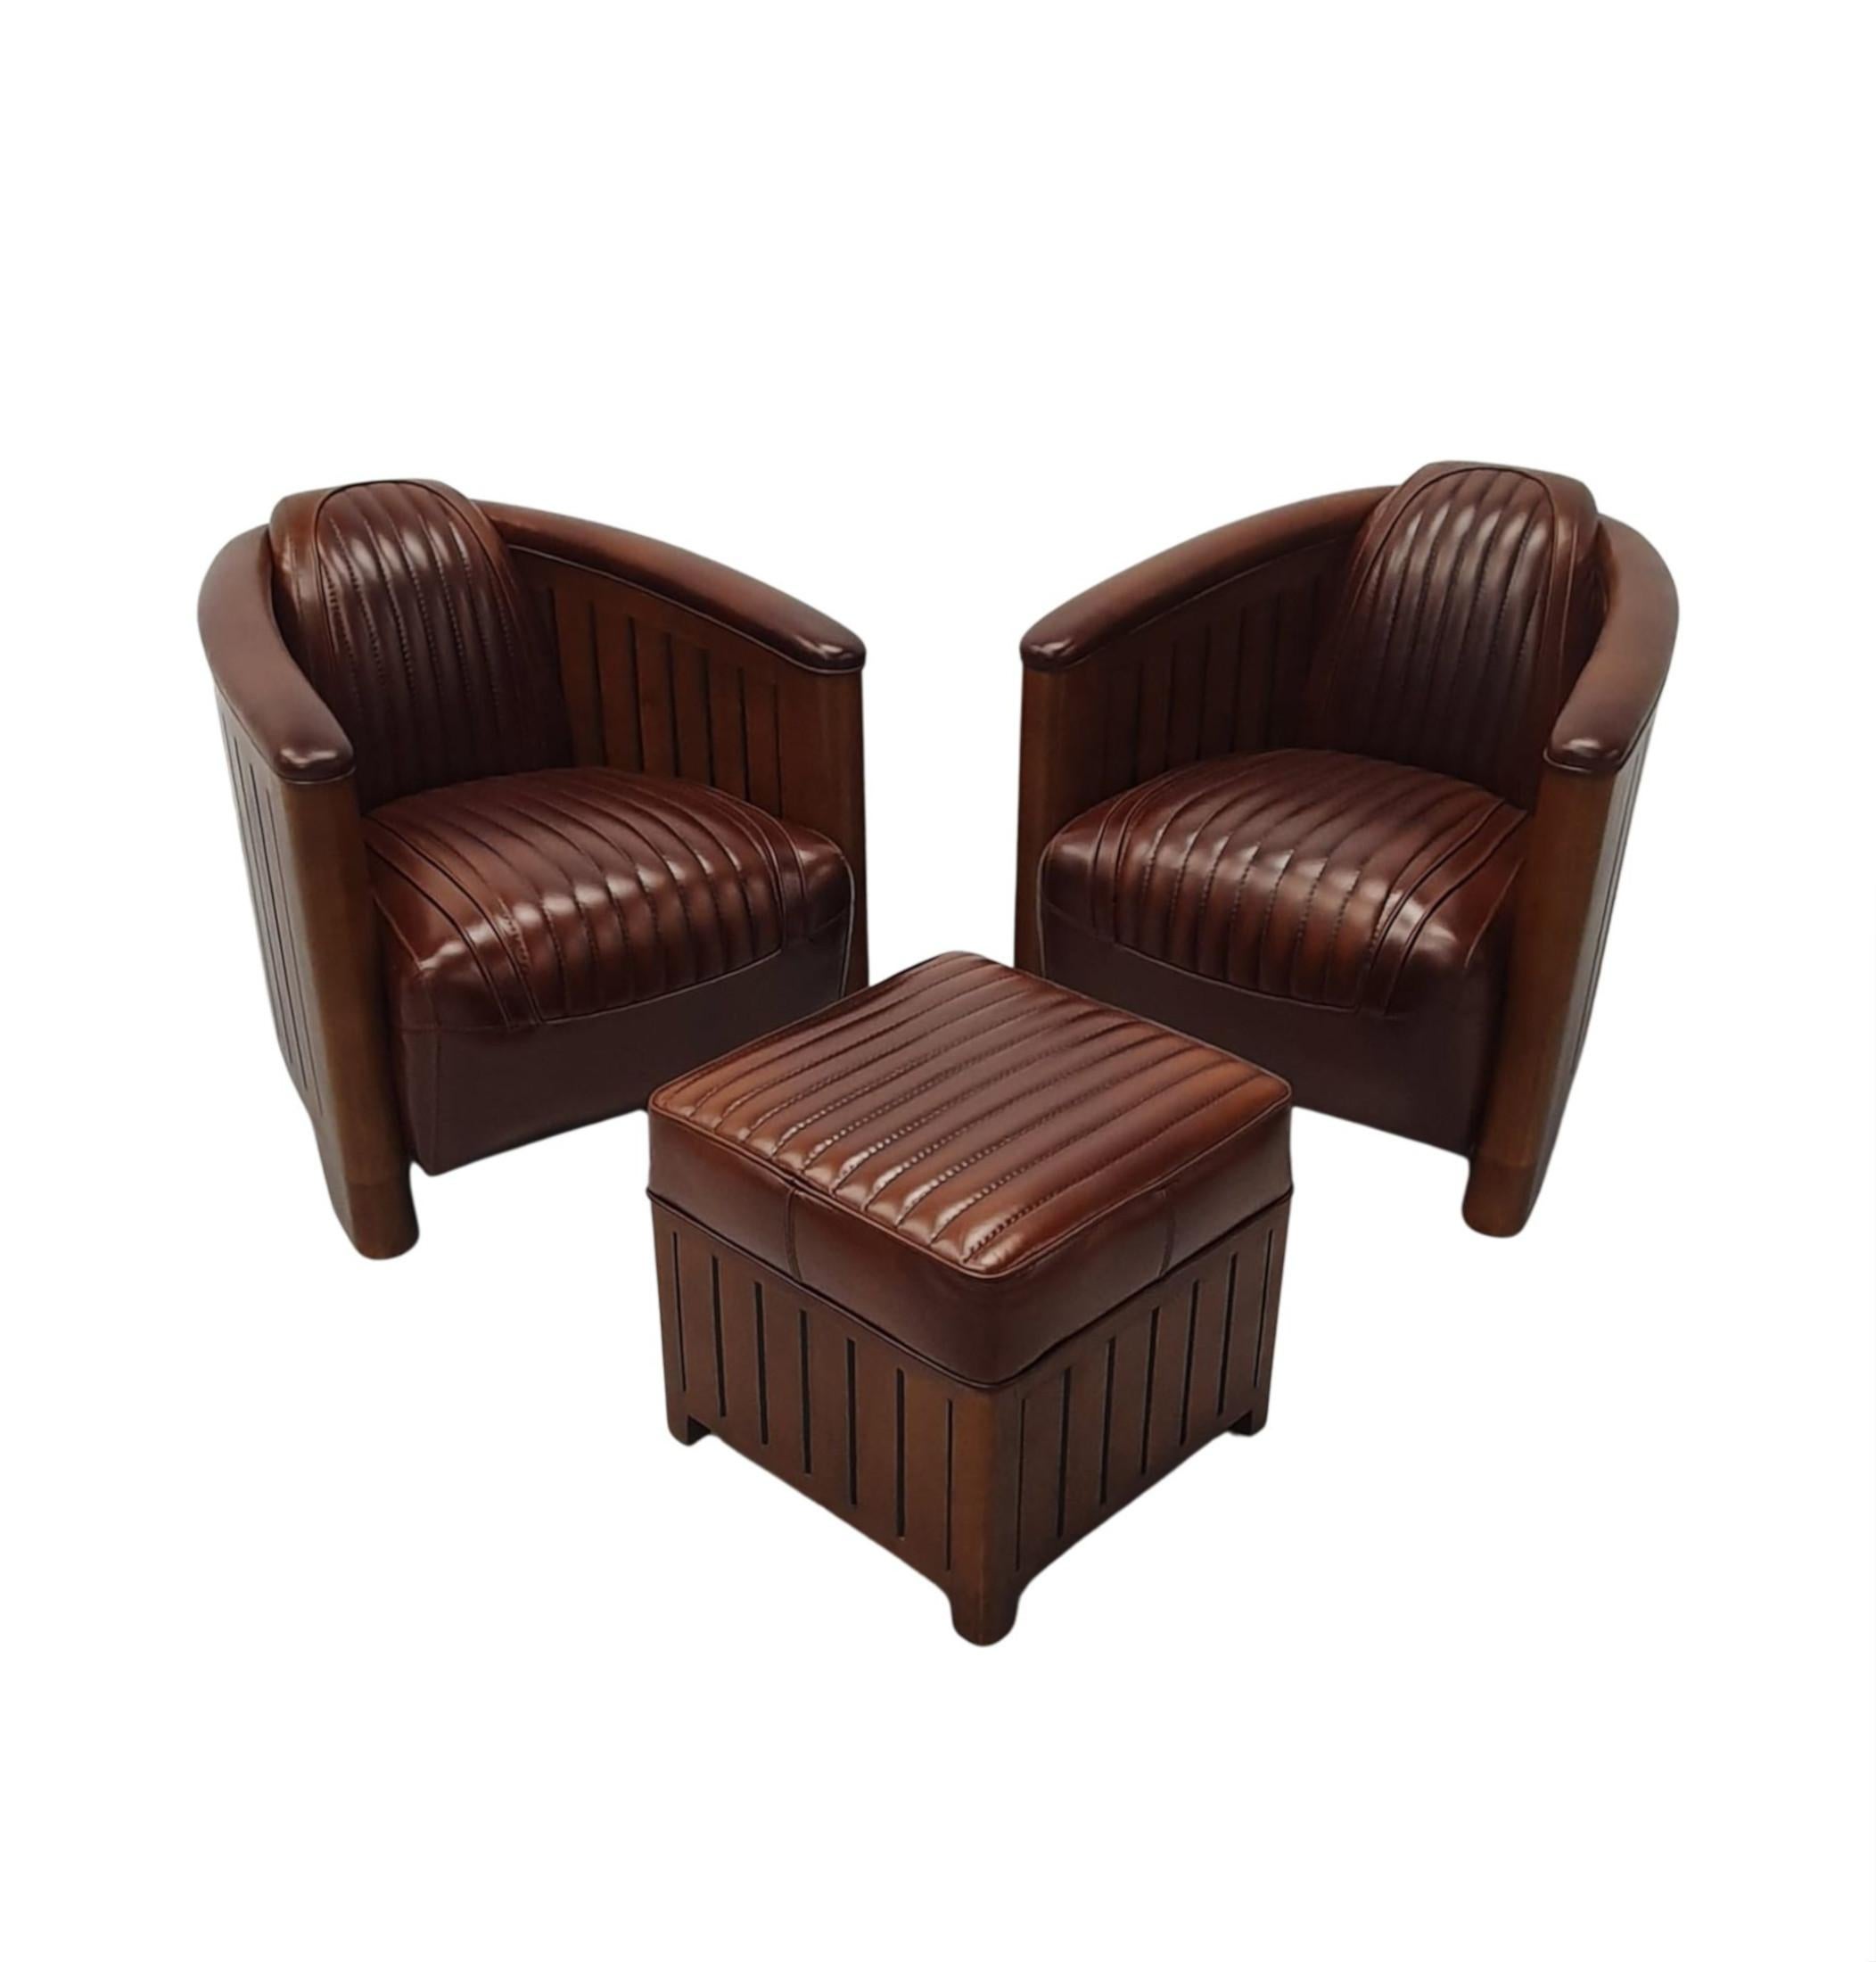 French A Stunning Club Armchair in the Art Deco Style